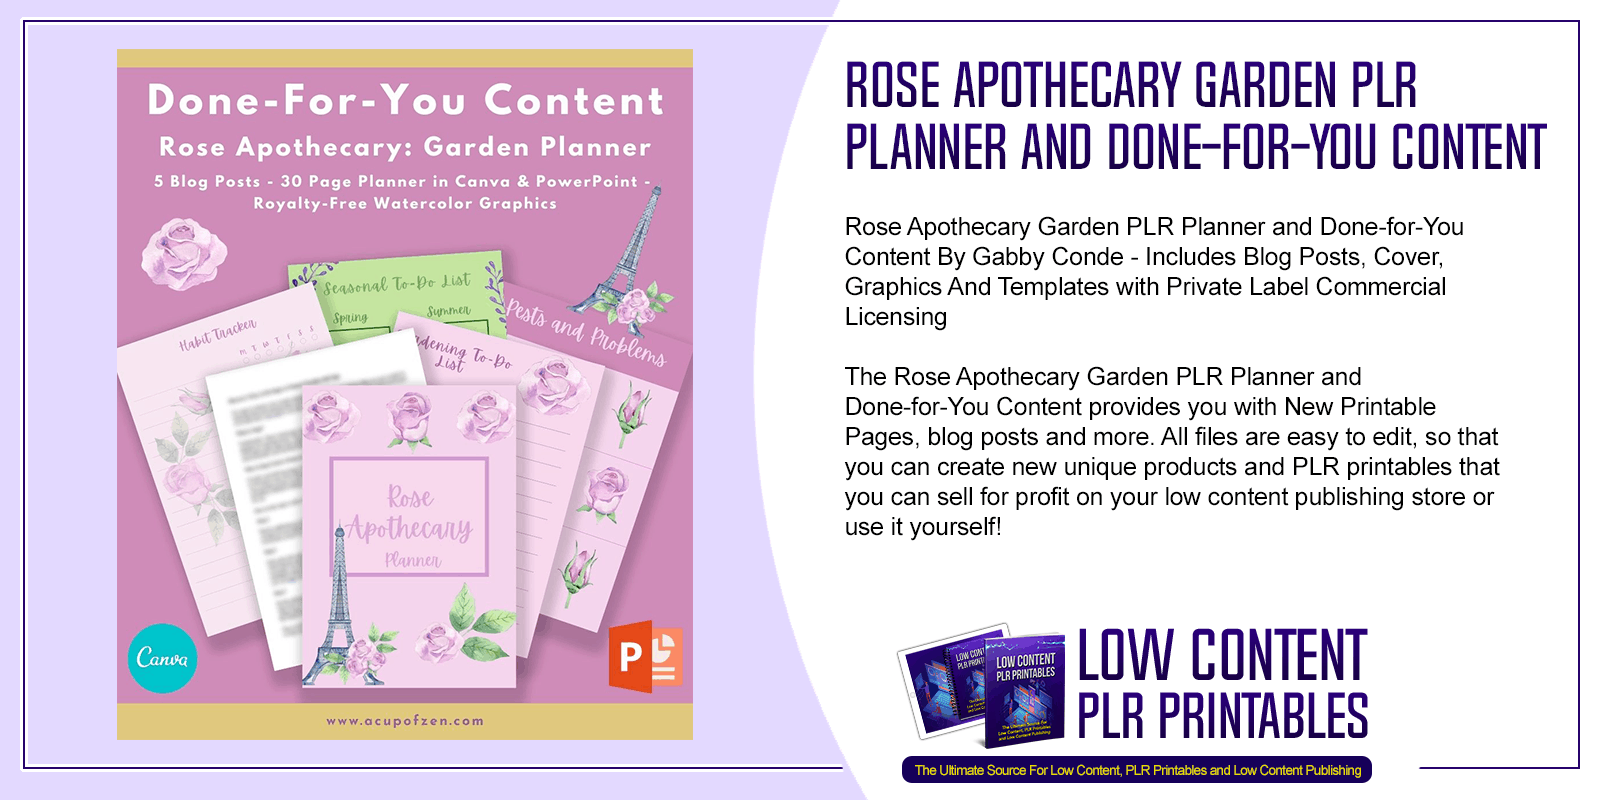 Rose Apothecary Garden PLR Planner and Done for You Content